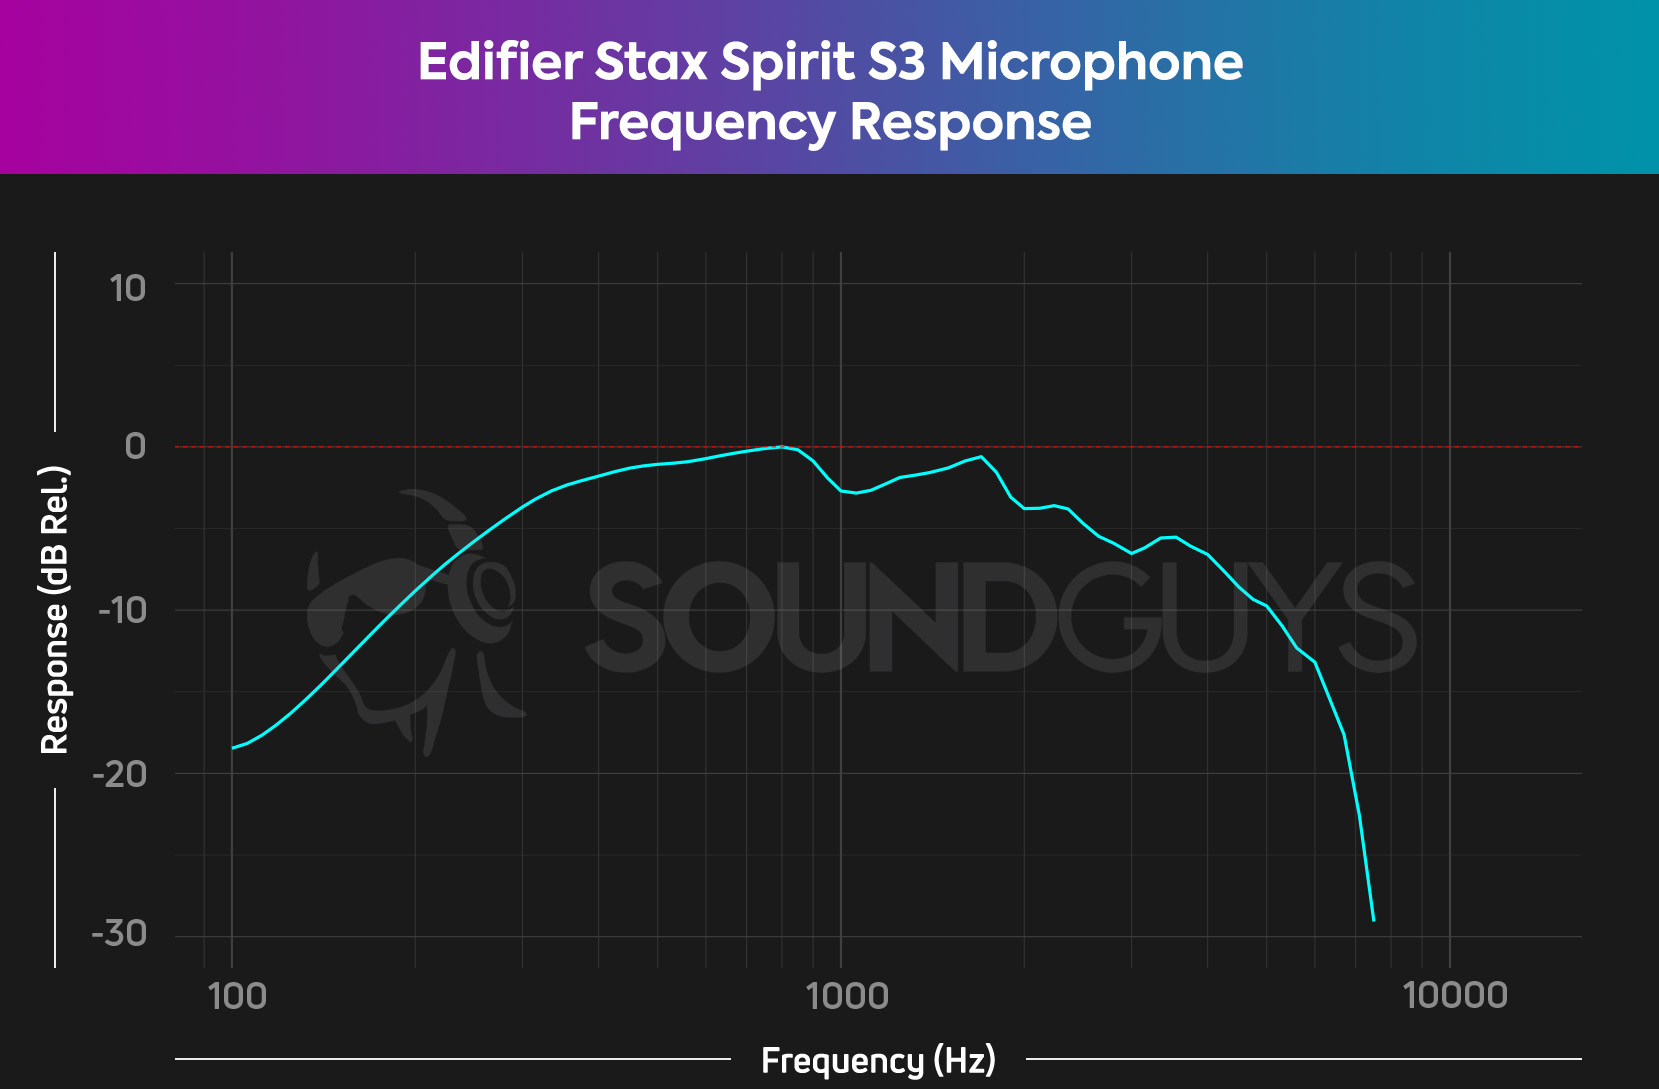 A chart showing themicrophone frequency response of the Edifier Stax Spirit S3 